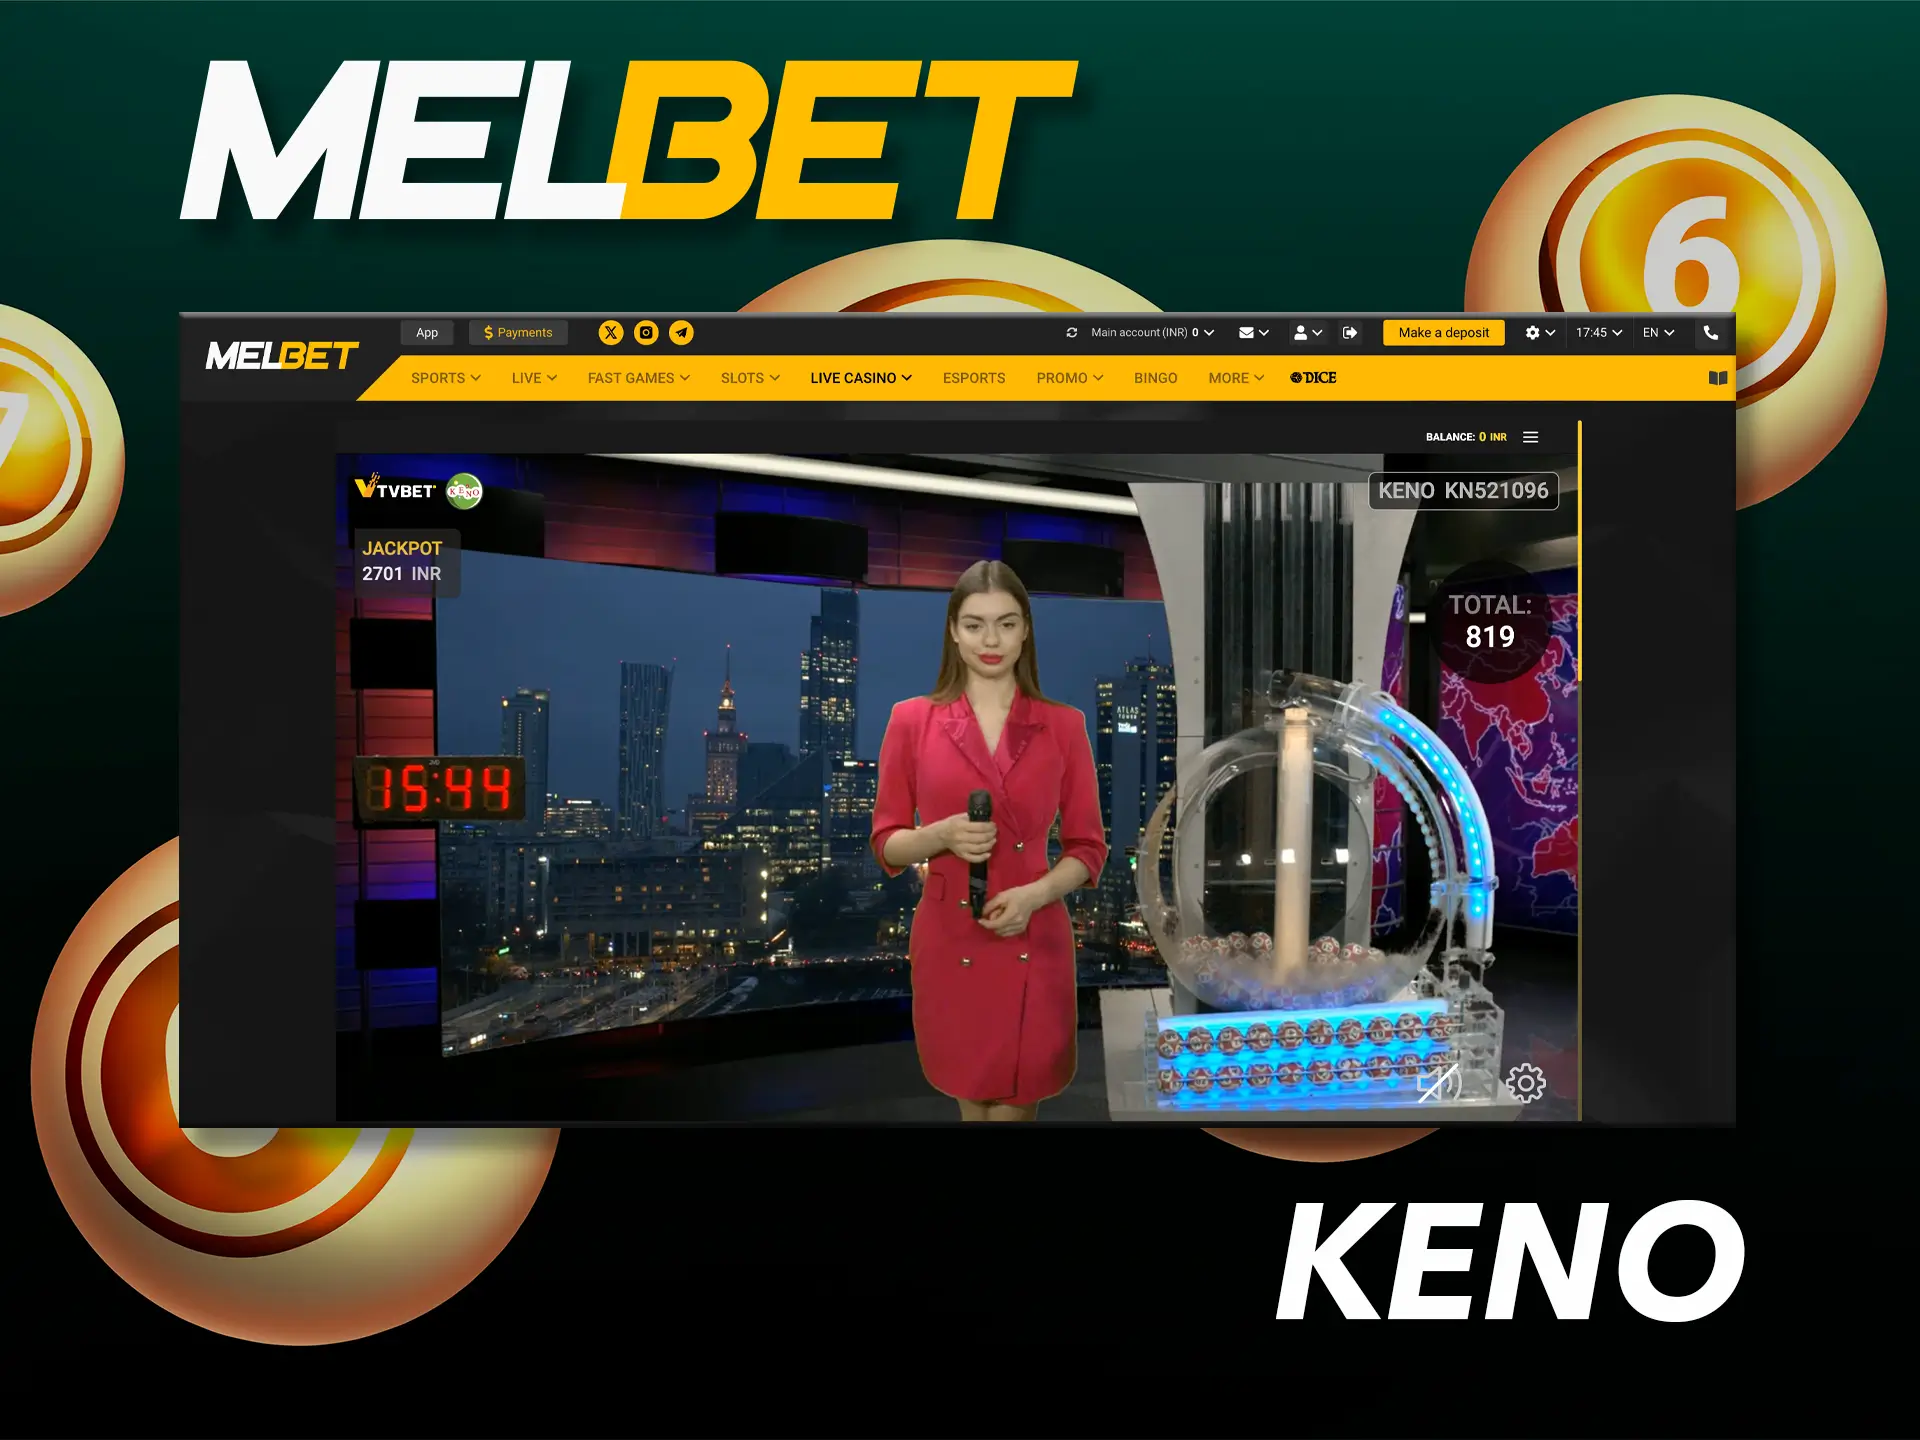 Try the lottery at Melbet with big prizes.